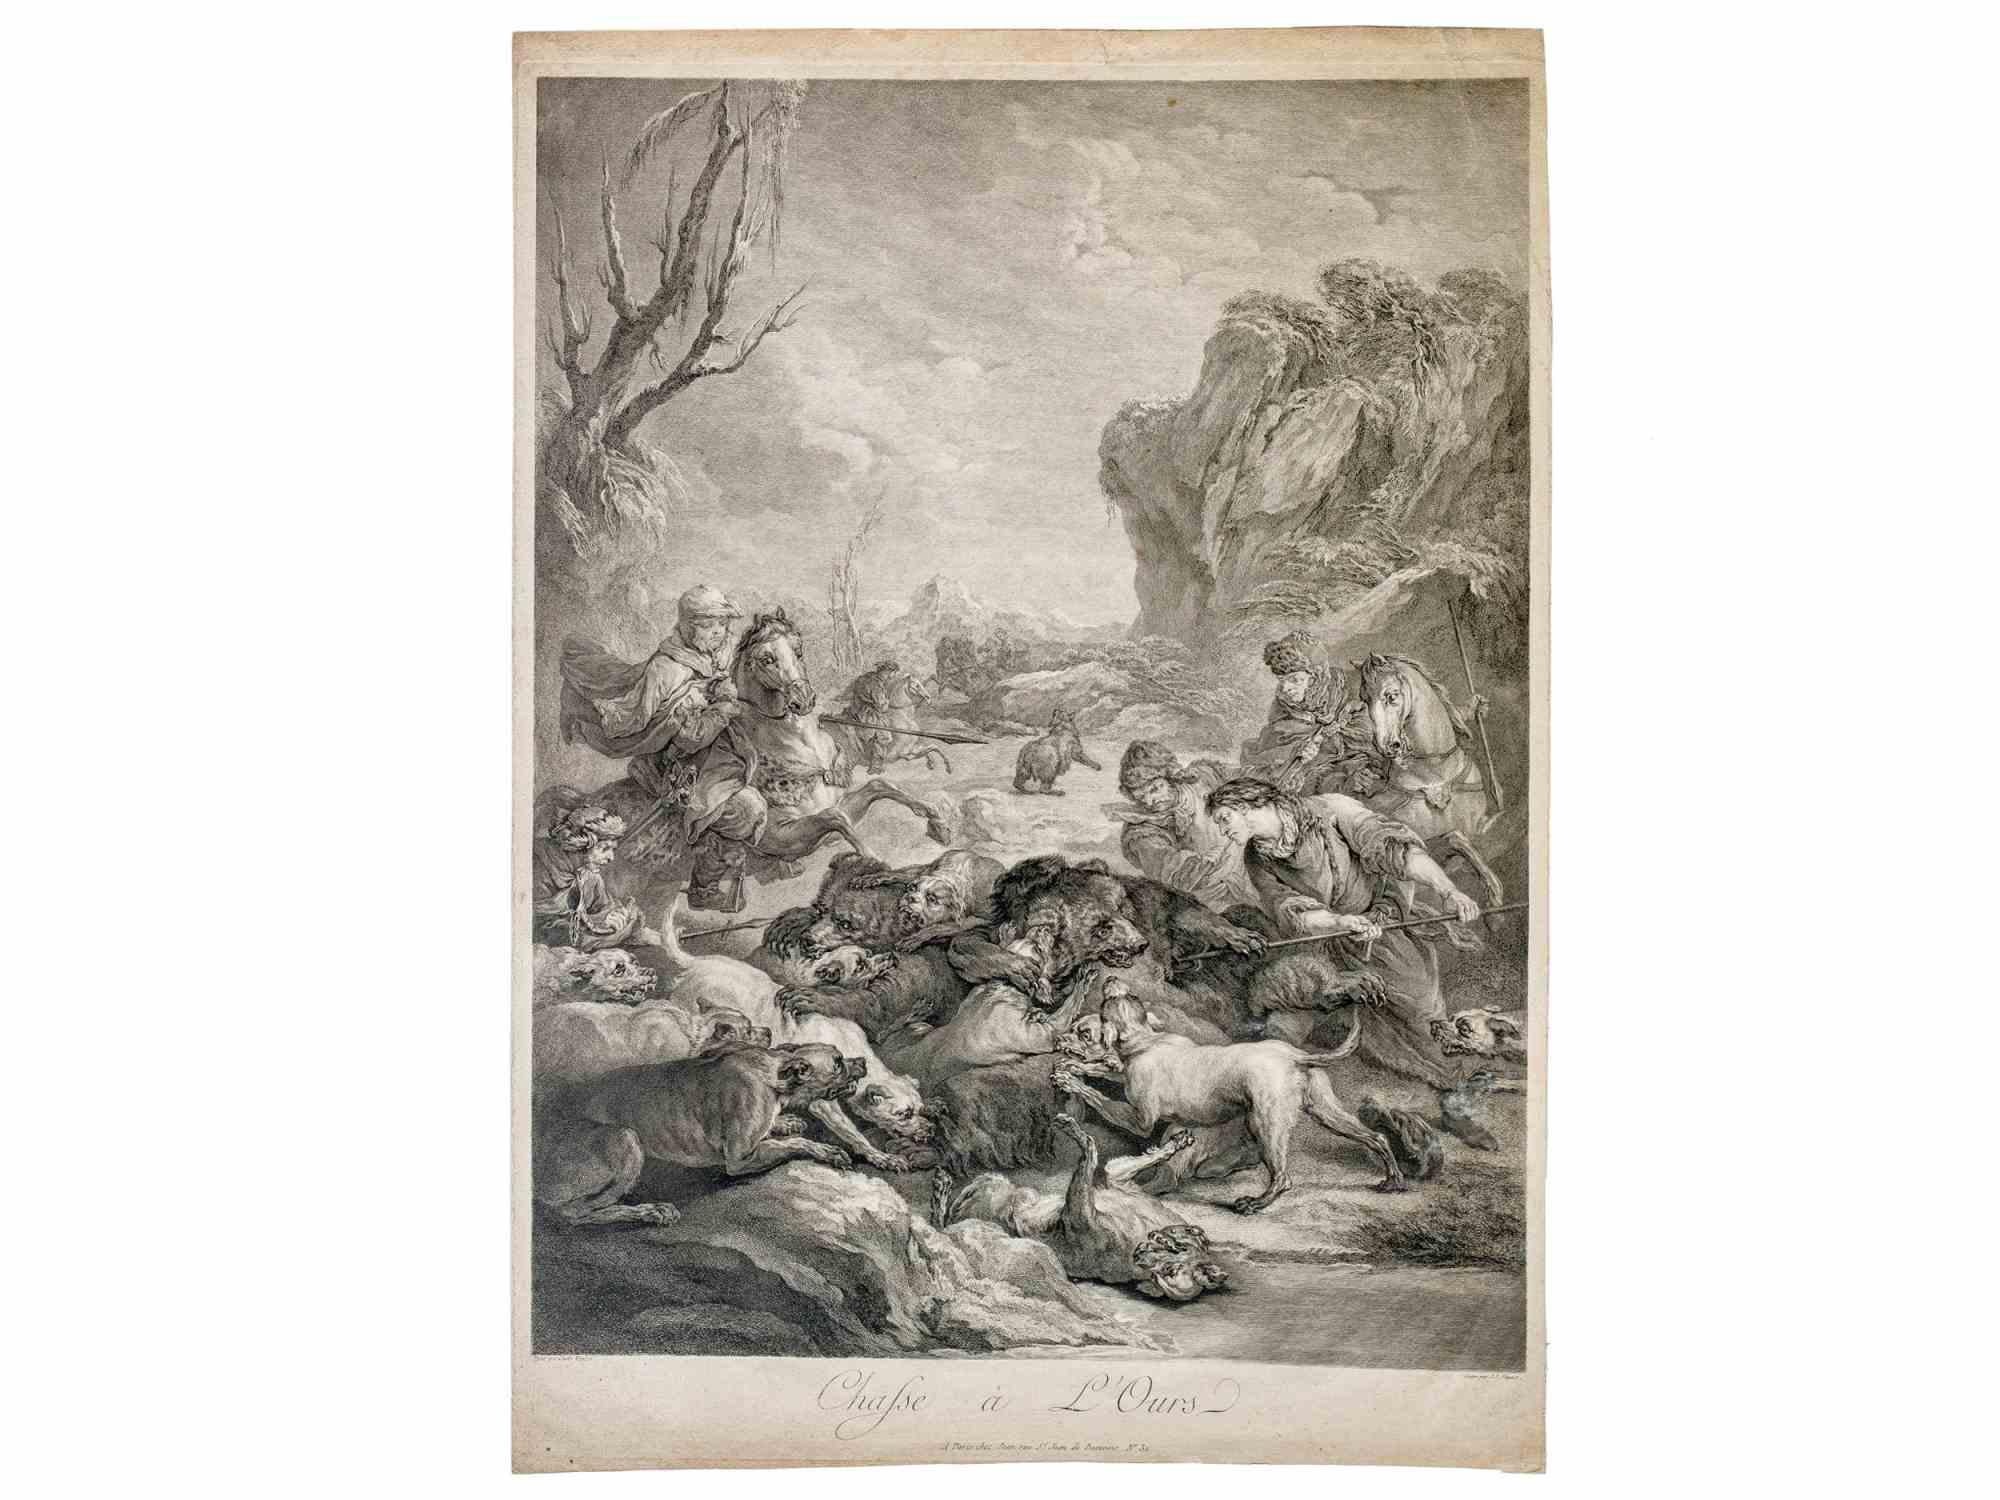 Hunting the Bear is an old master artwork realized by Jean Jaques Flipart (1709 - 1782) in the late 18th Century

Sheet dimensions 37.5 x 52 cm

Title printed on plate.